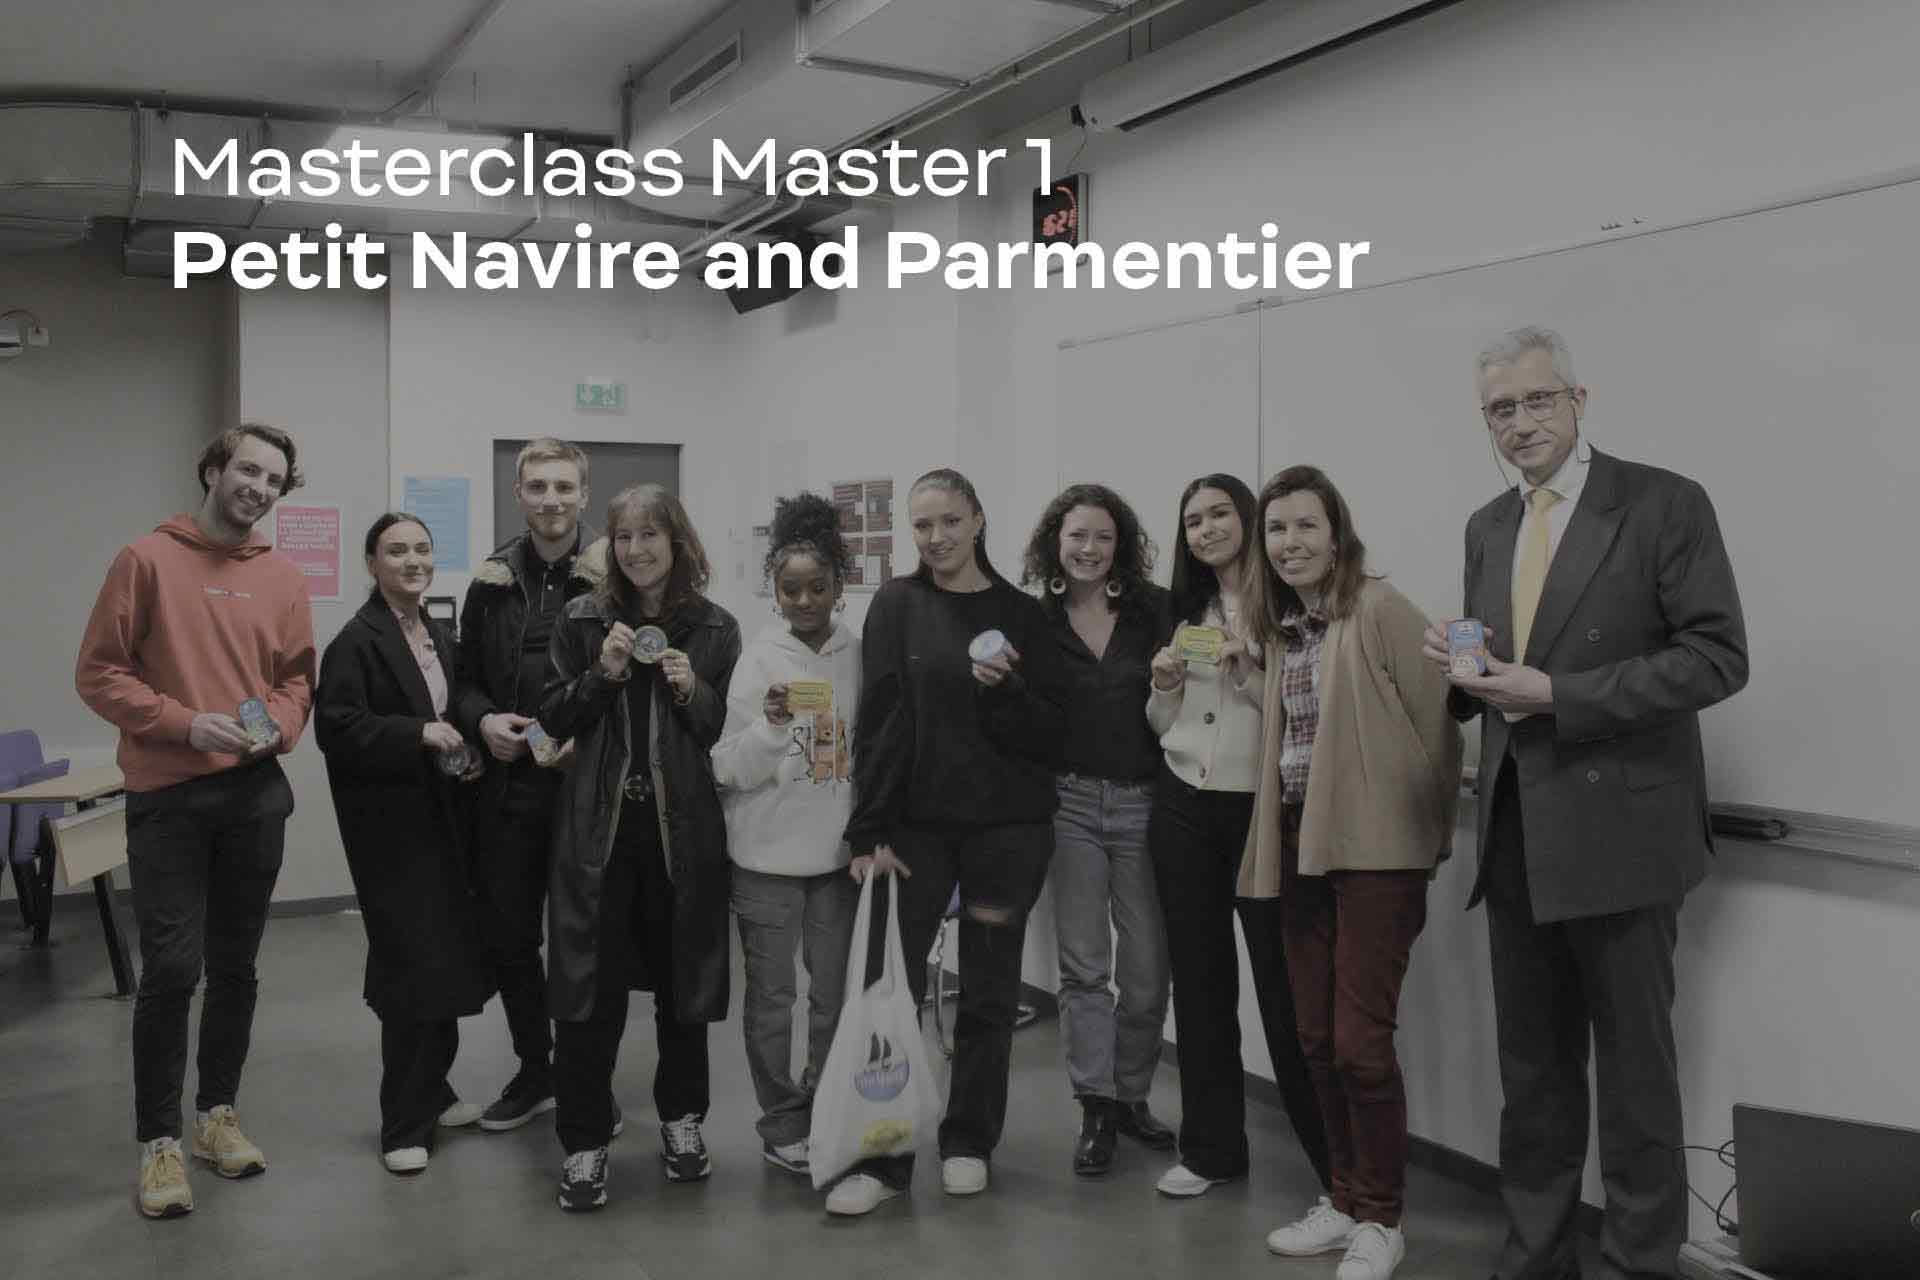 A Masterclass in partnership with Petit Navire and Parmentier